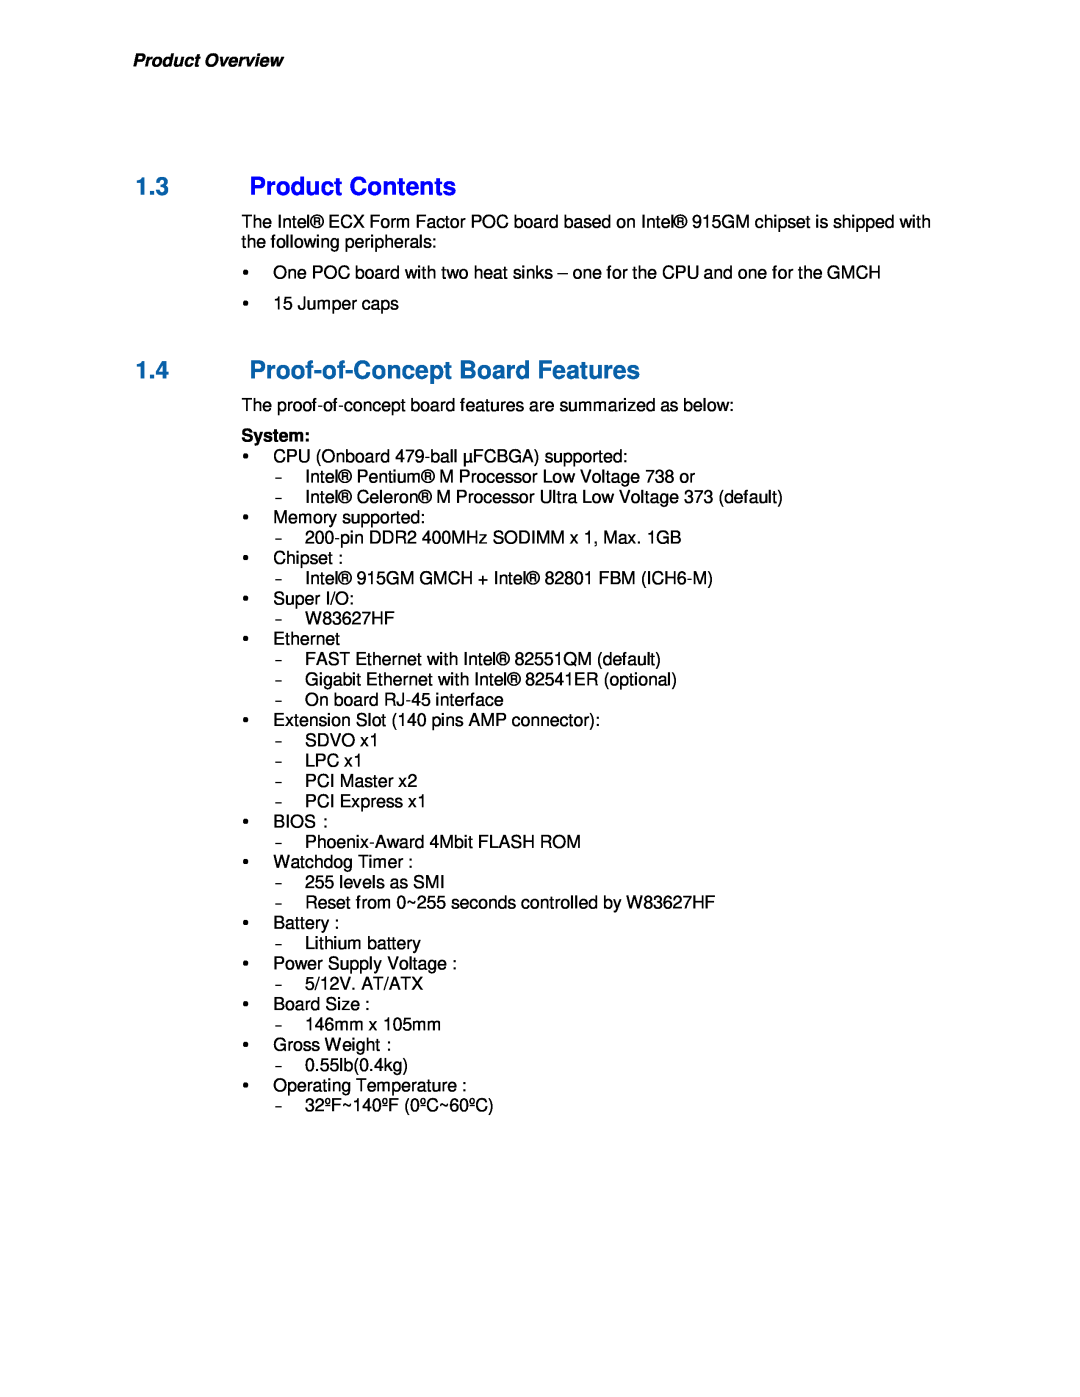 Intel 915GM user manual 1.4Proof-of-ConceptBoard Features, System, 1.3Product Contents, Product Overview 